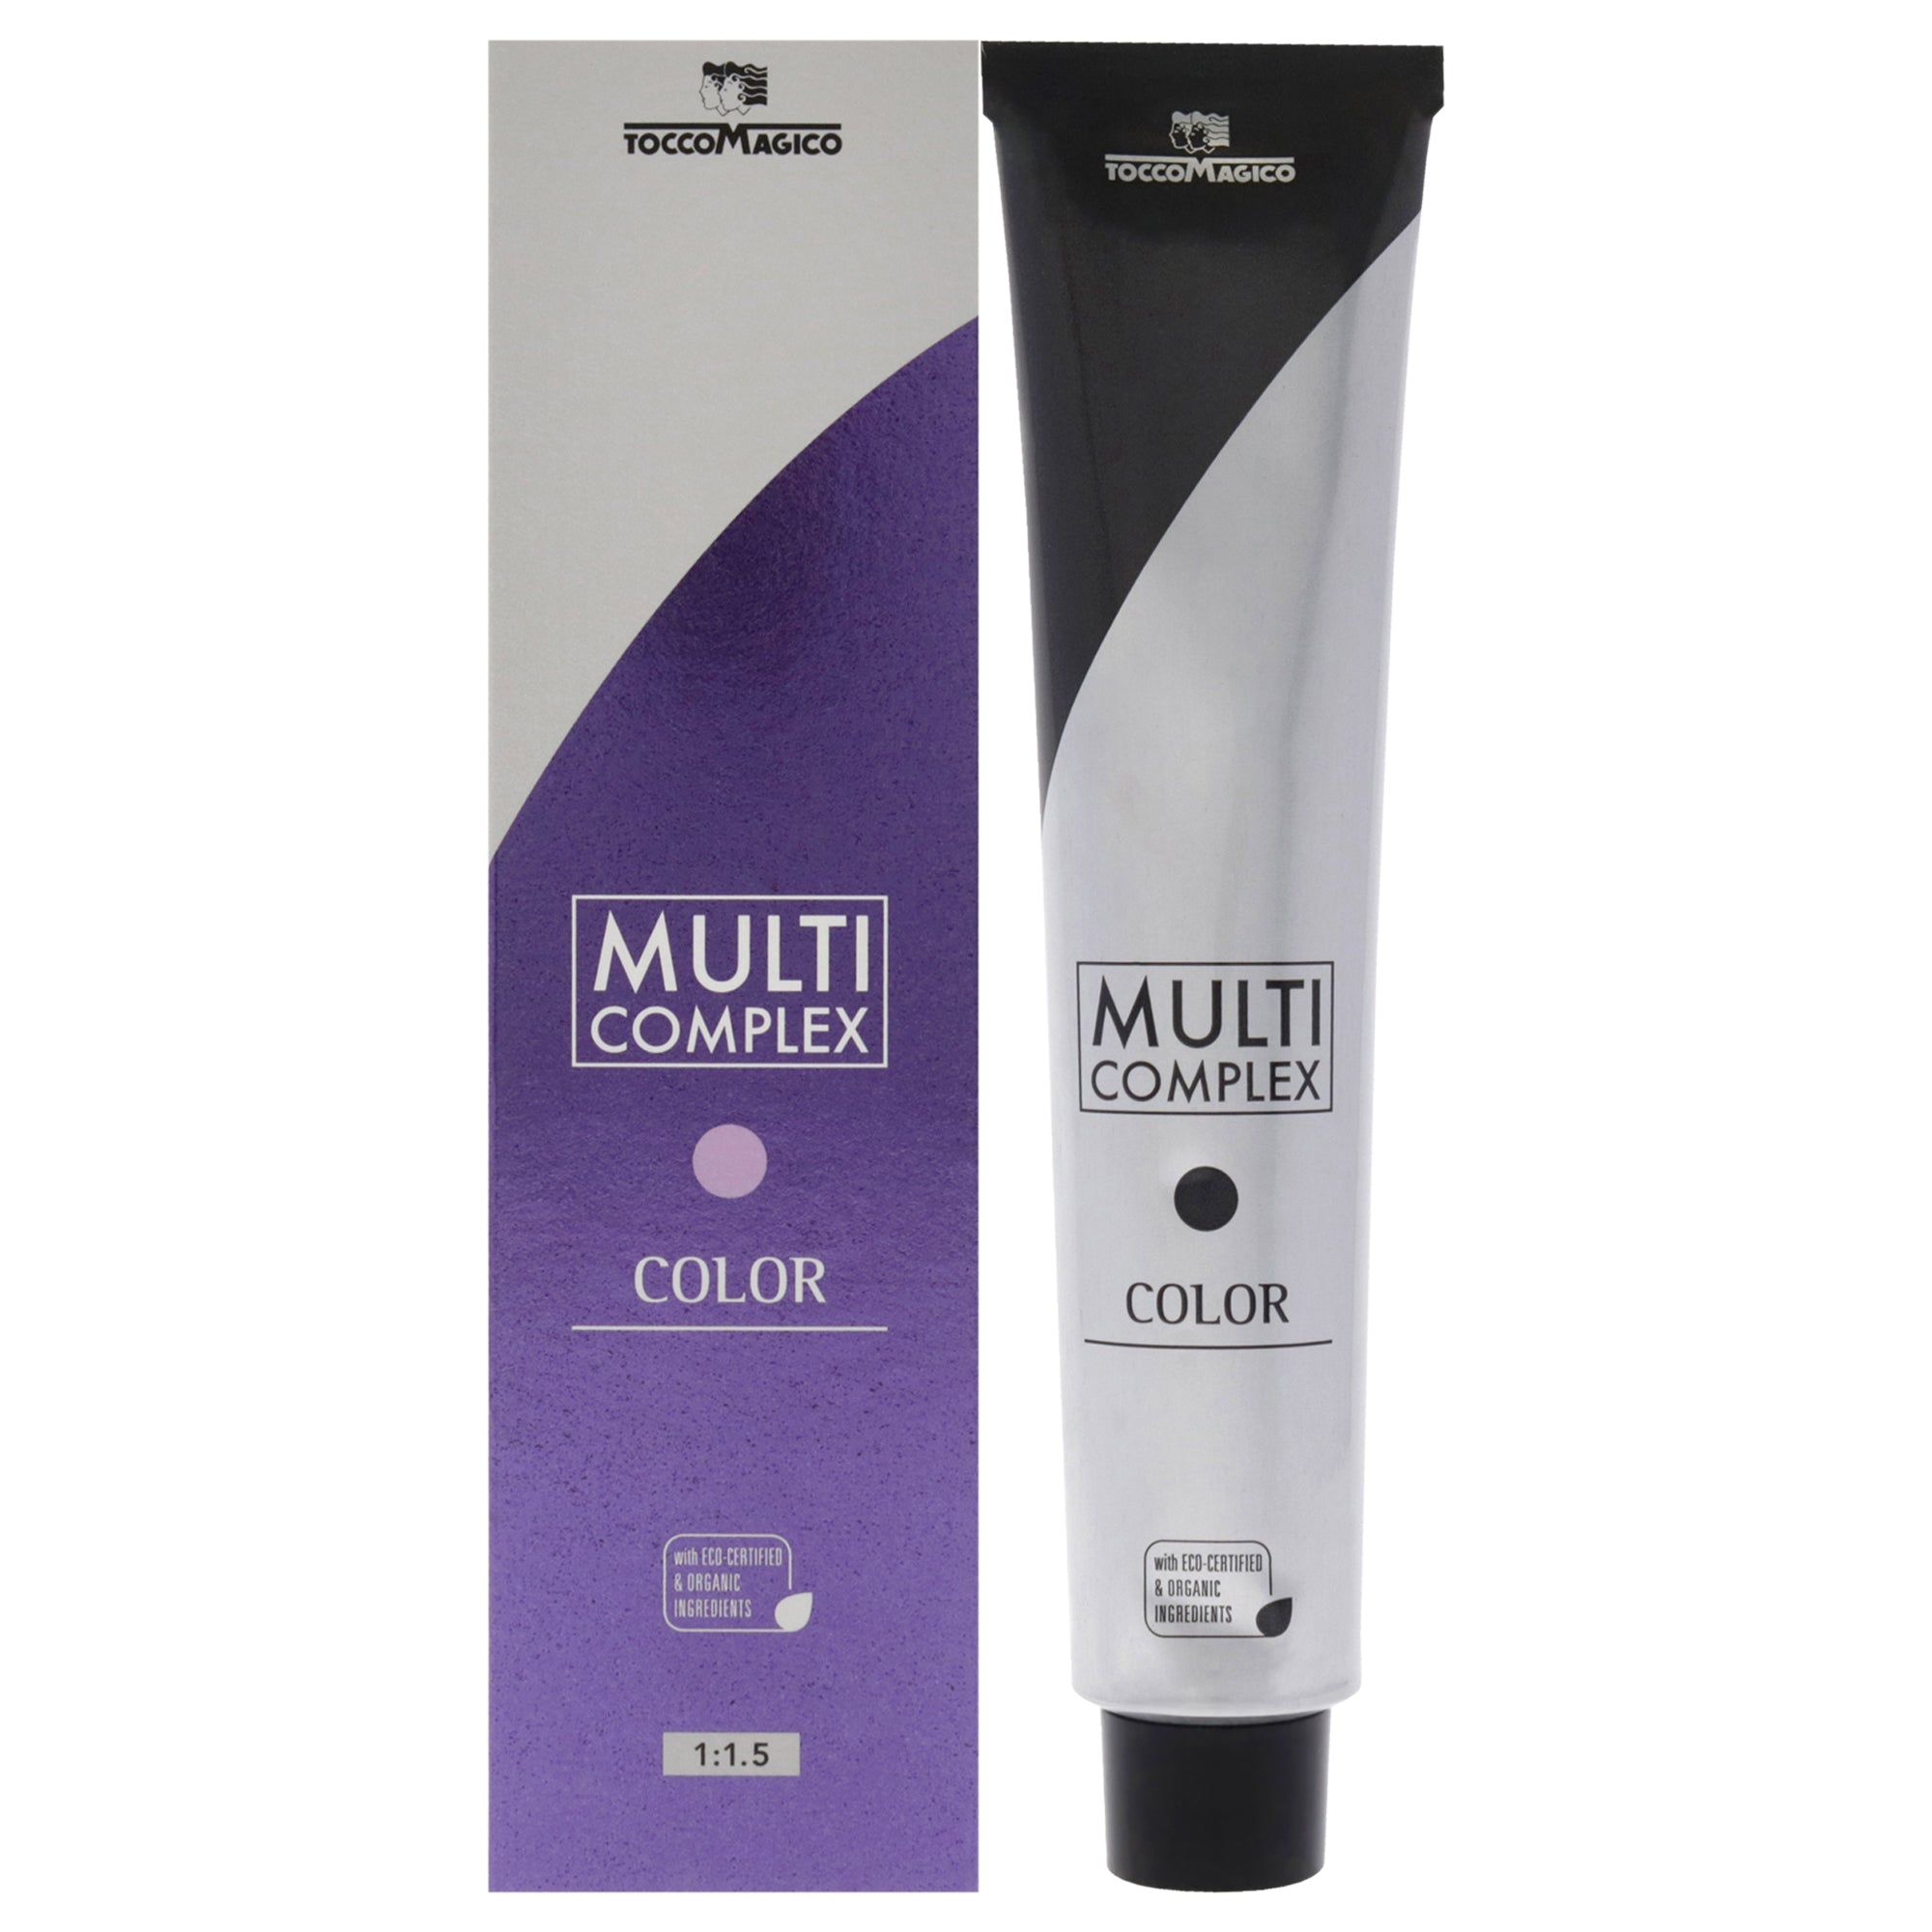 Multi Complex Permanet Hair Color - 6.66 Intense Red Dark Blond by Tocco Magico for Unisex - 3.38 oz Hair Color